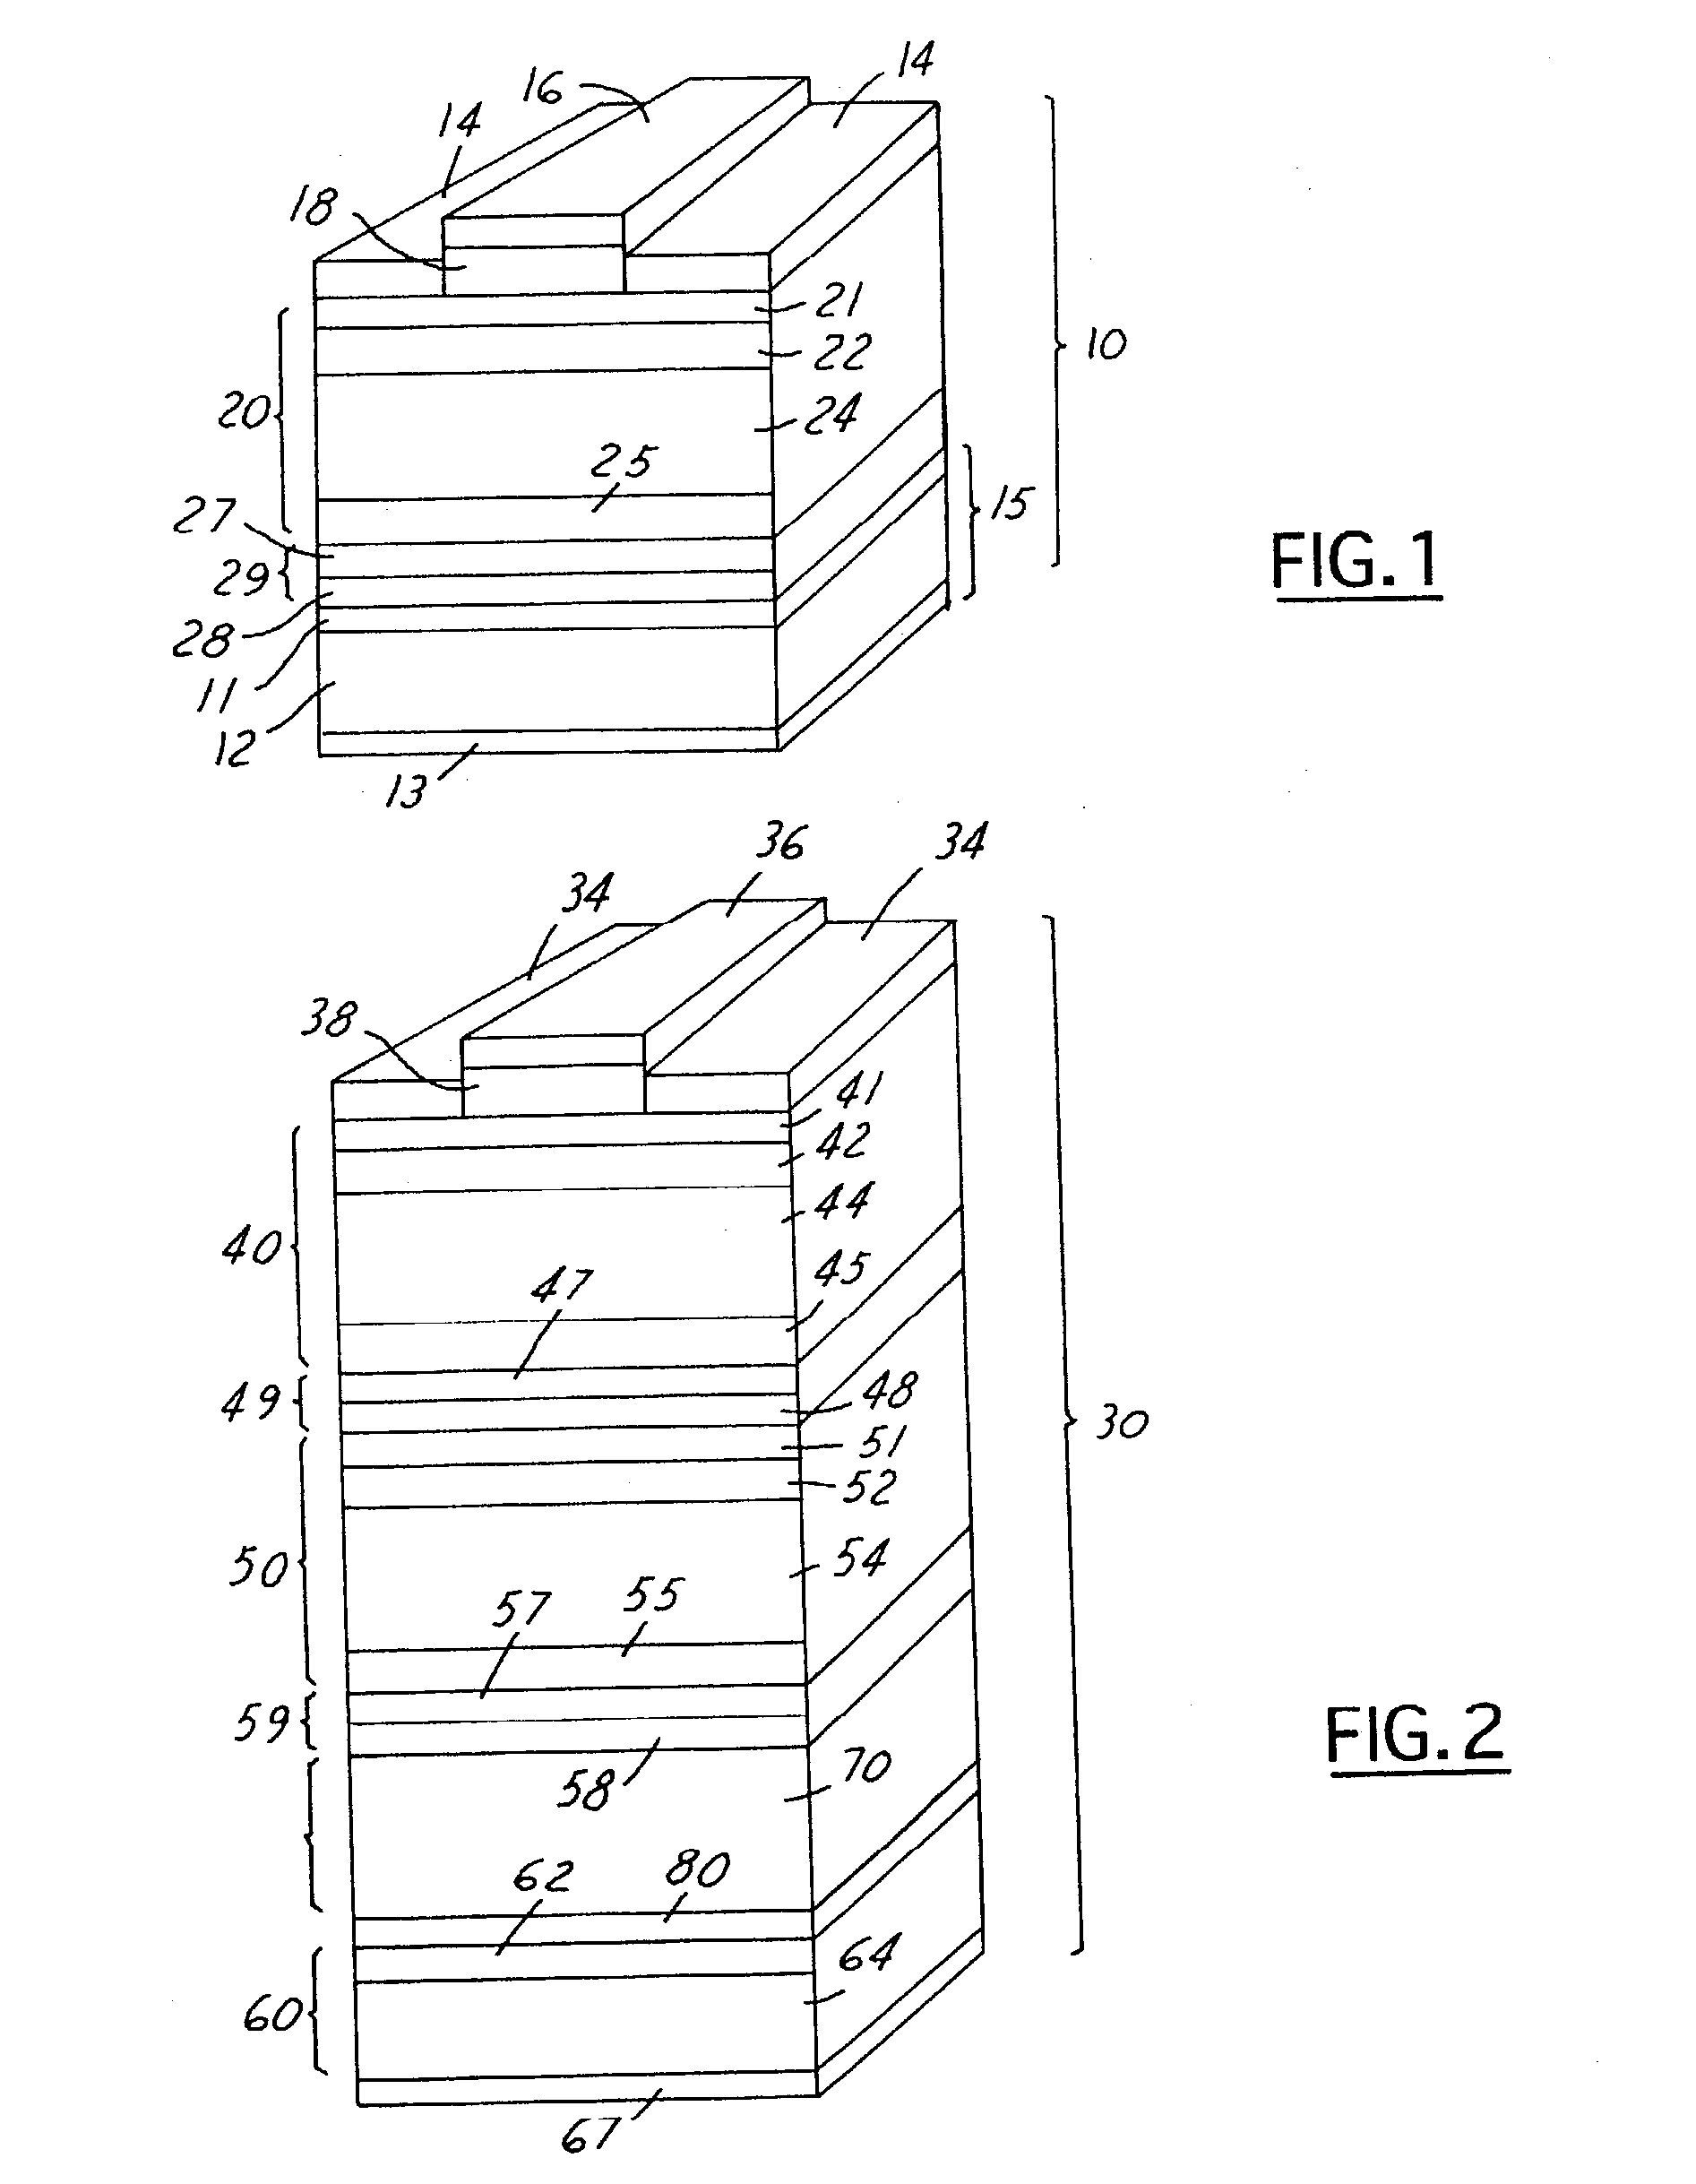 Wide-bandgap, lattice-mismatched window layer for a solar conversion device